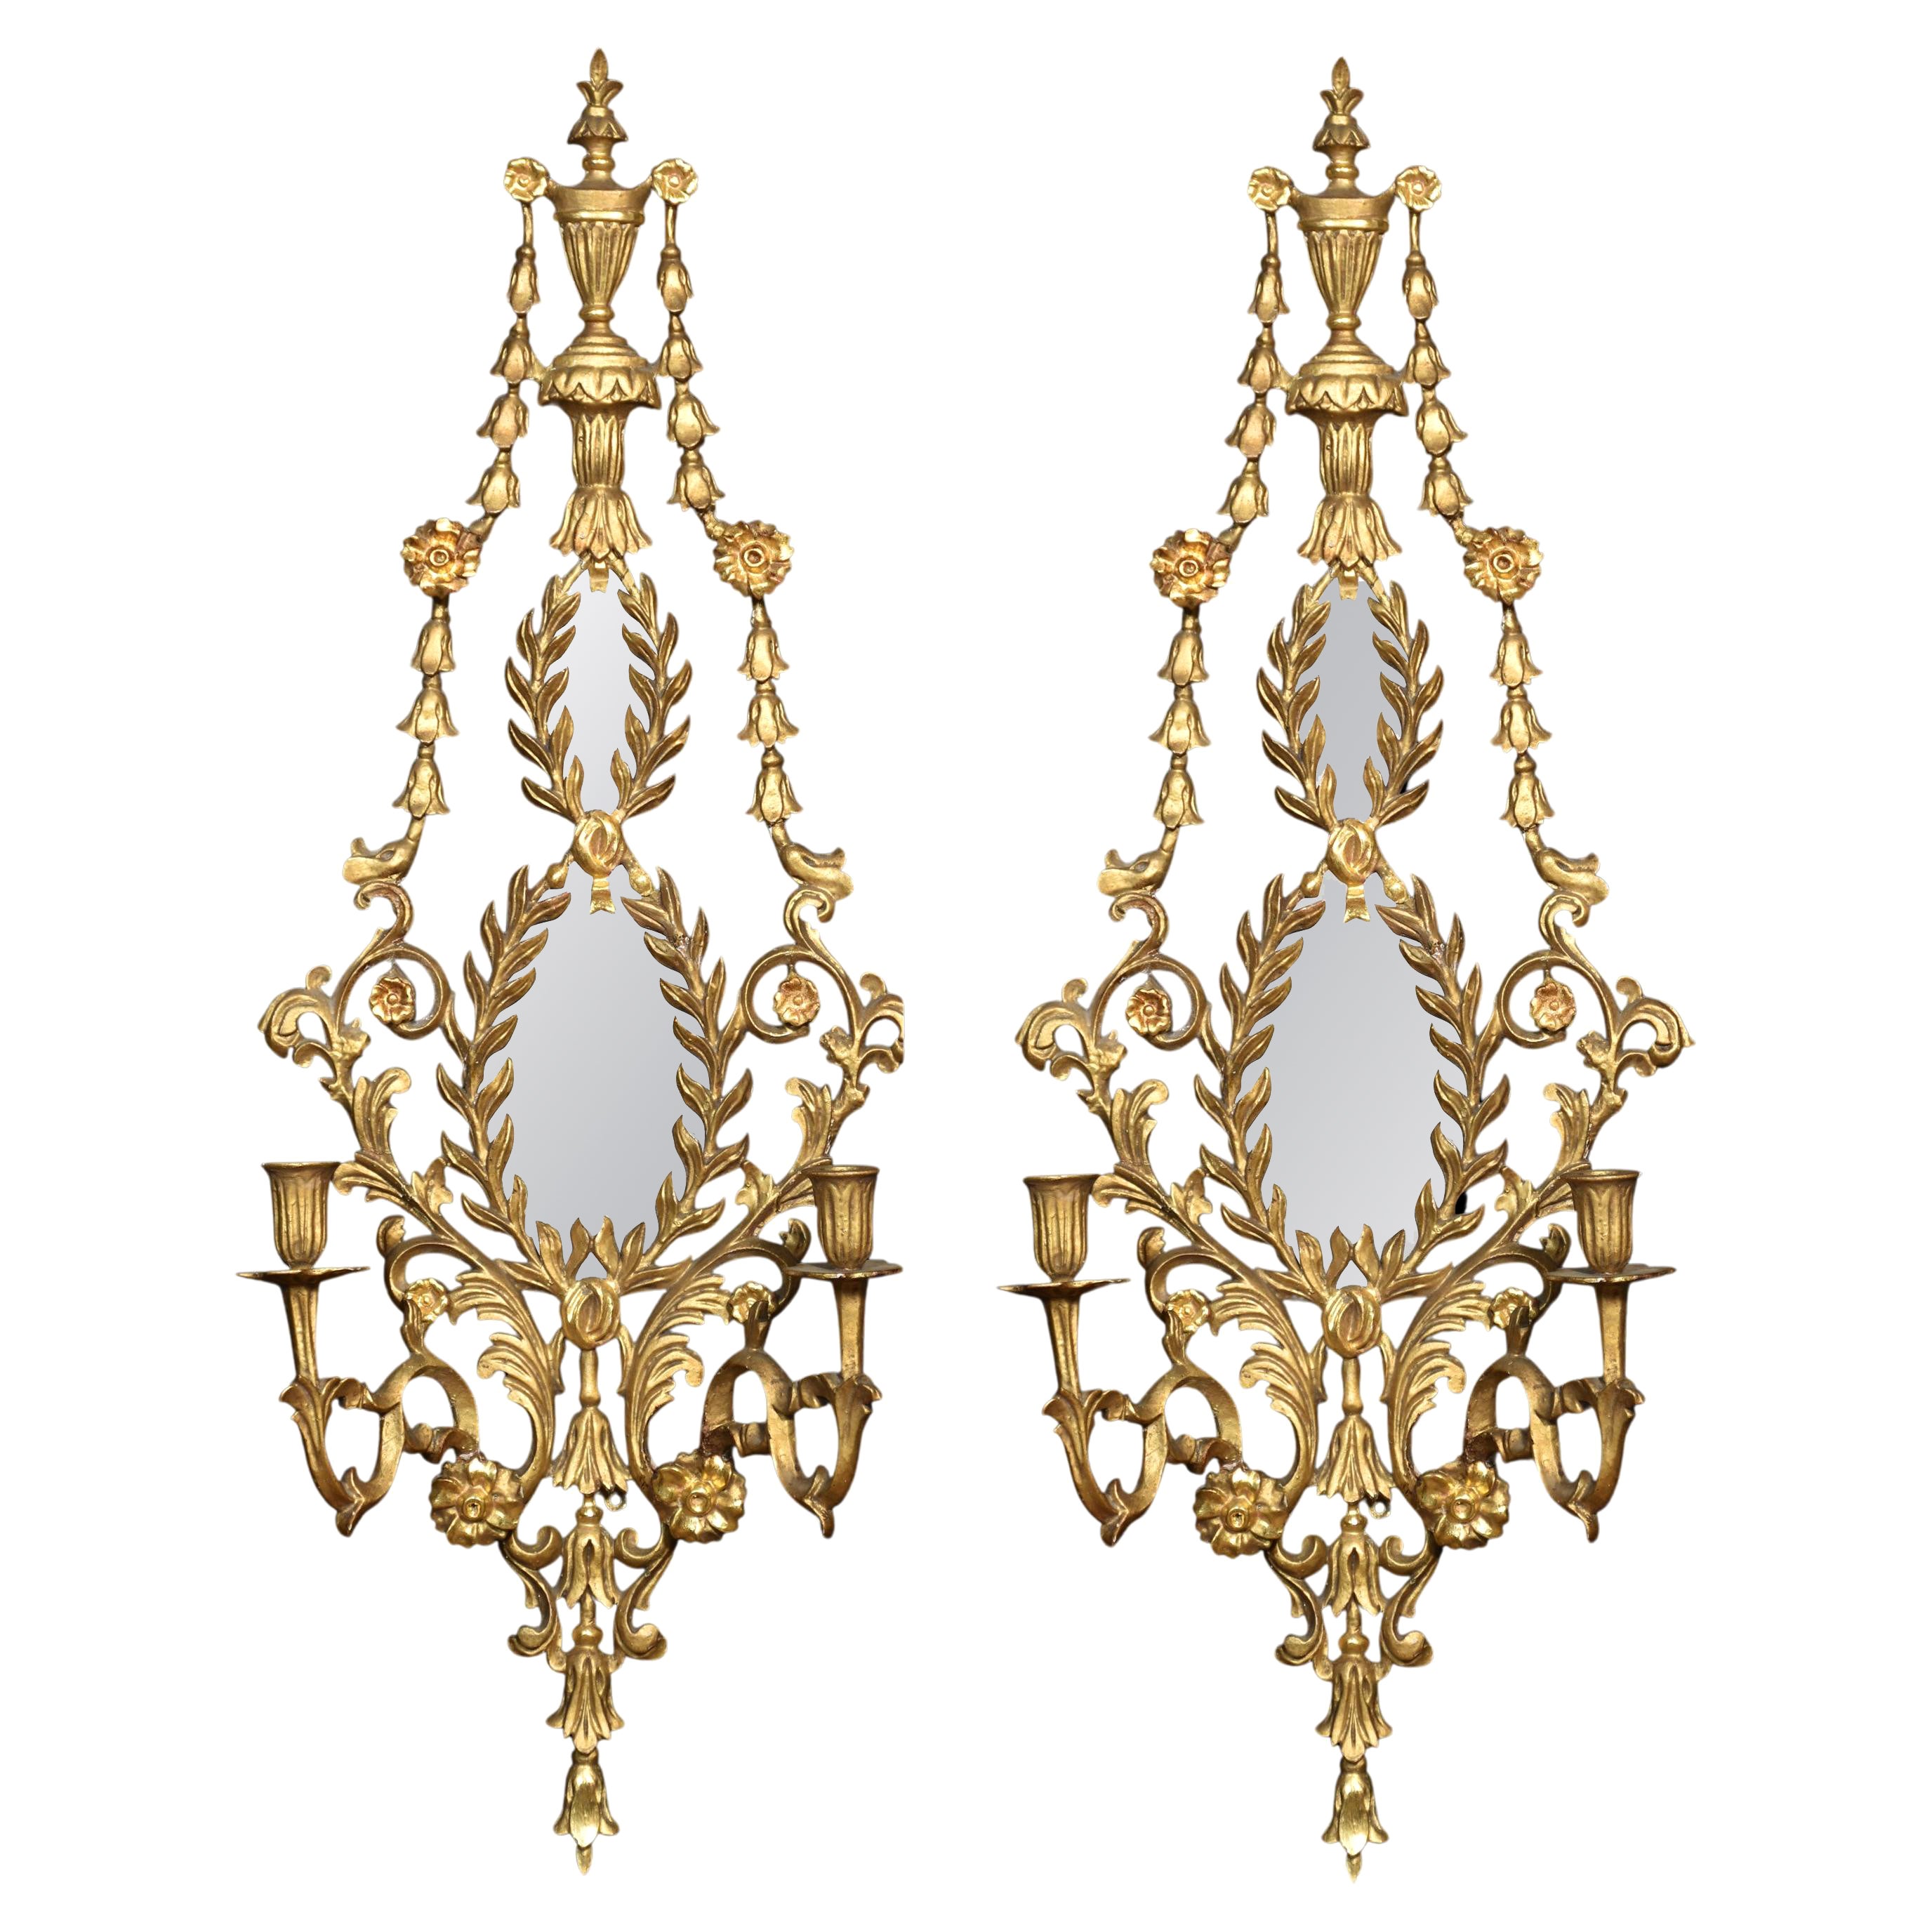 Pair of Neo-Classical style giltwood girandoles For Sale